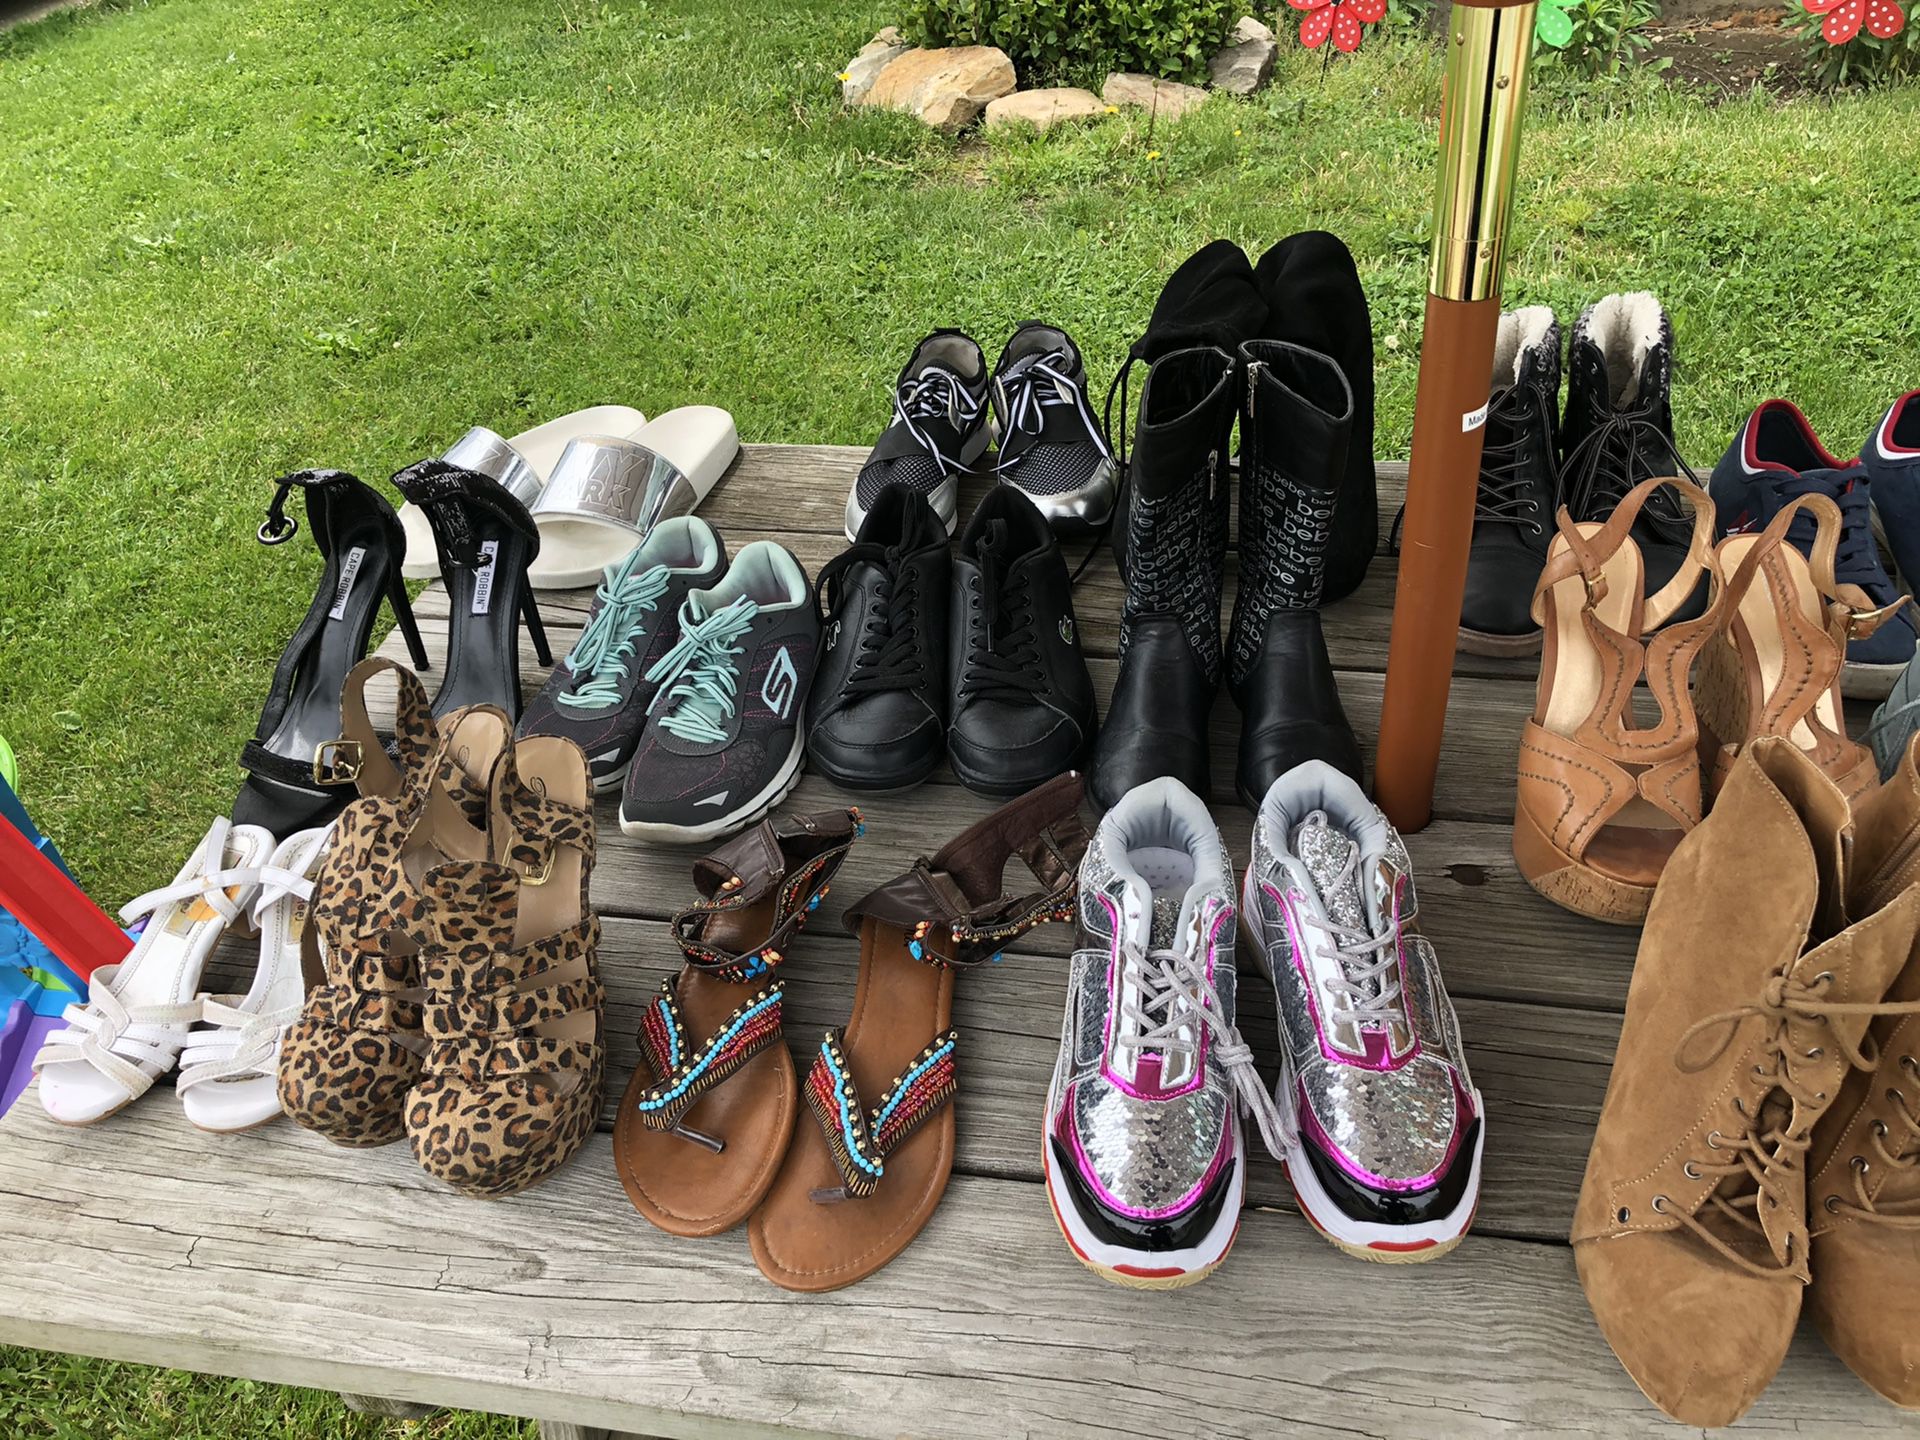 Shoes New and some Used $5 each